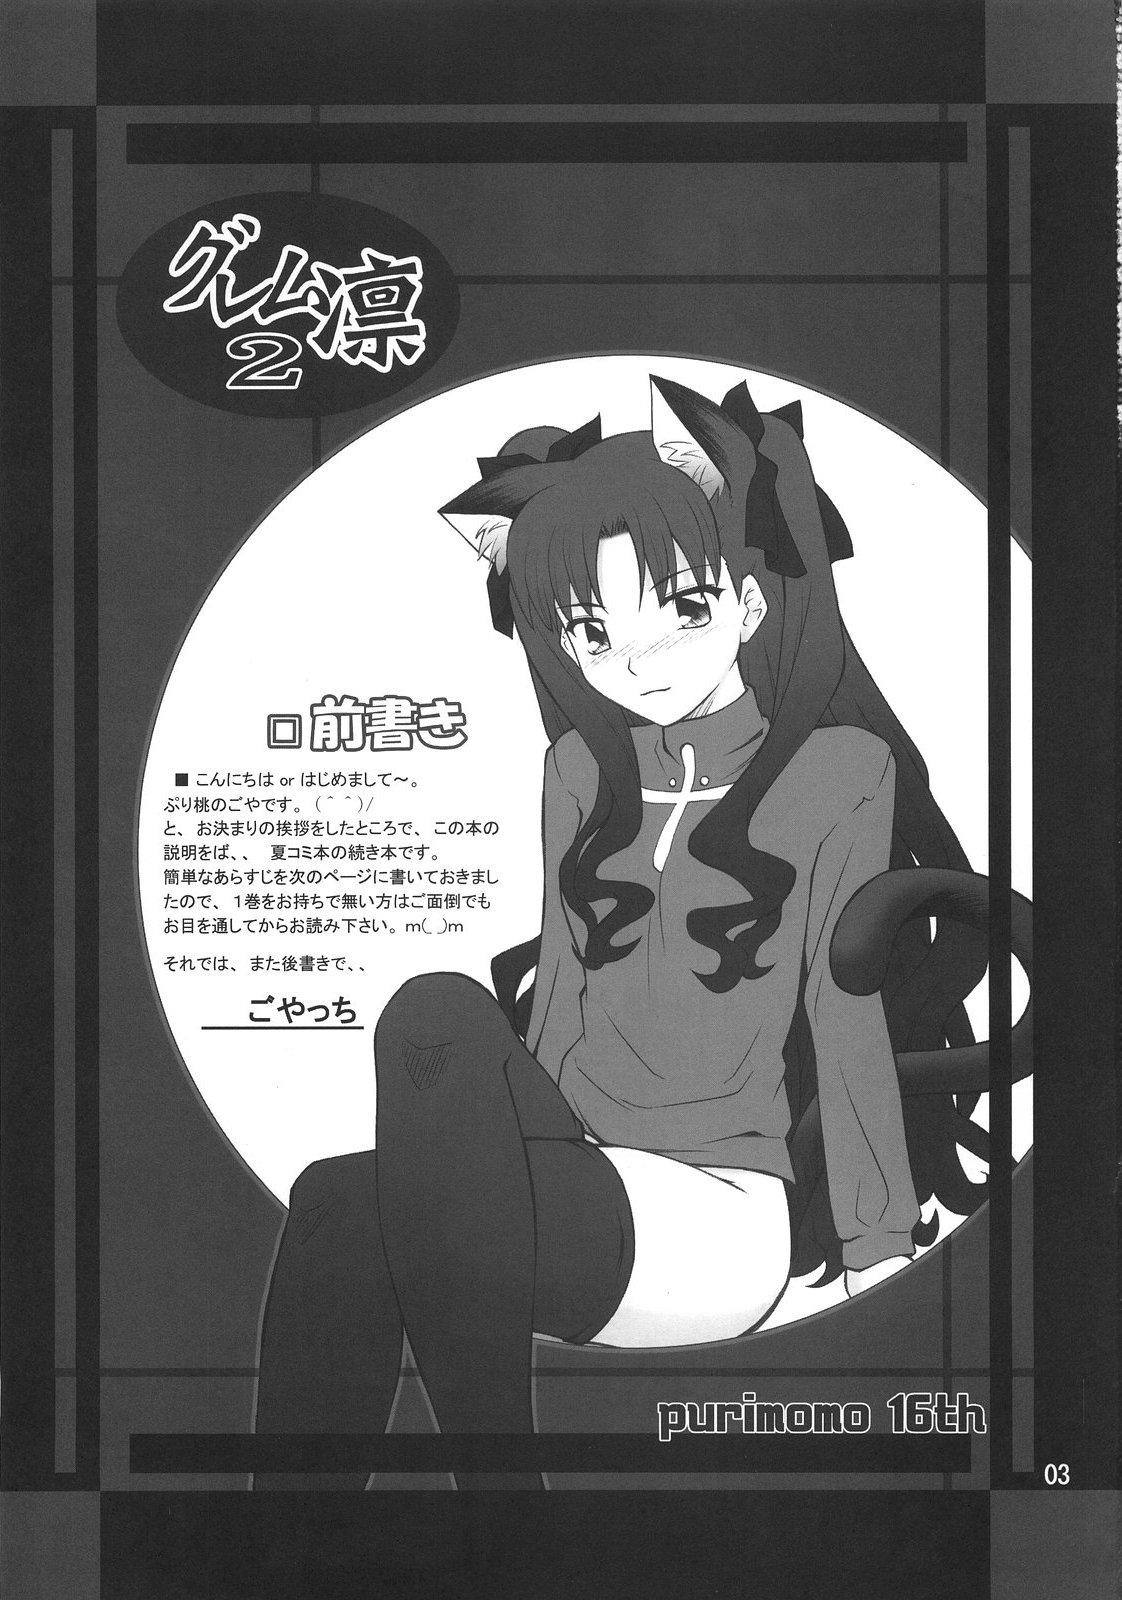 College Grem-Rin 2 - Fate stay night Bear - Page 2